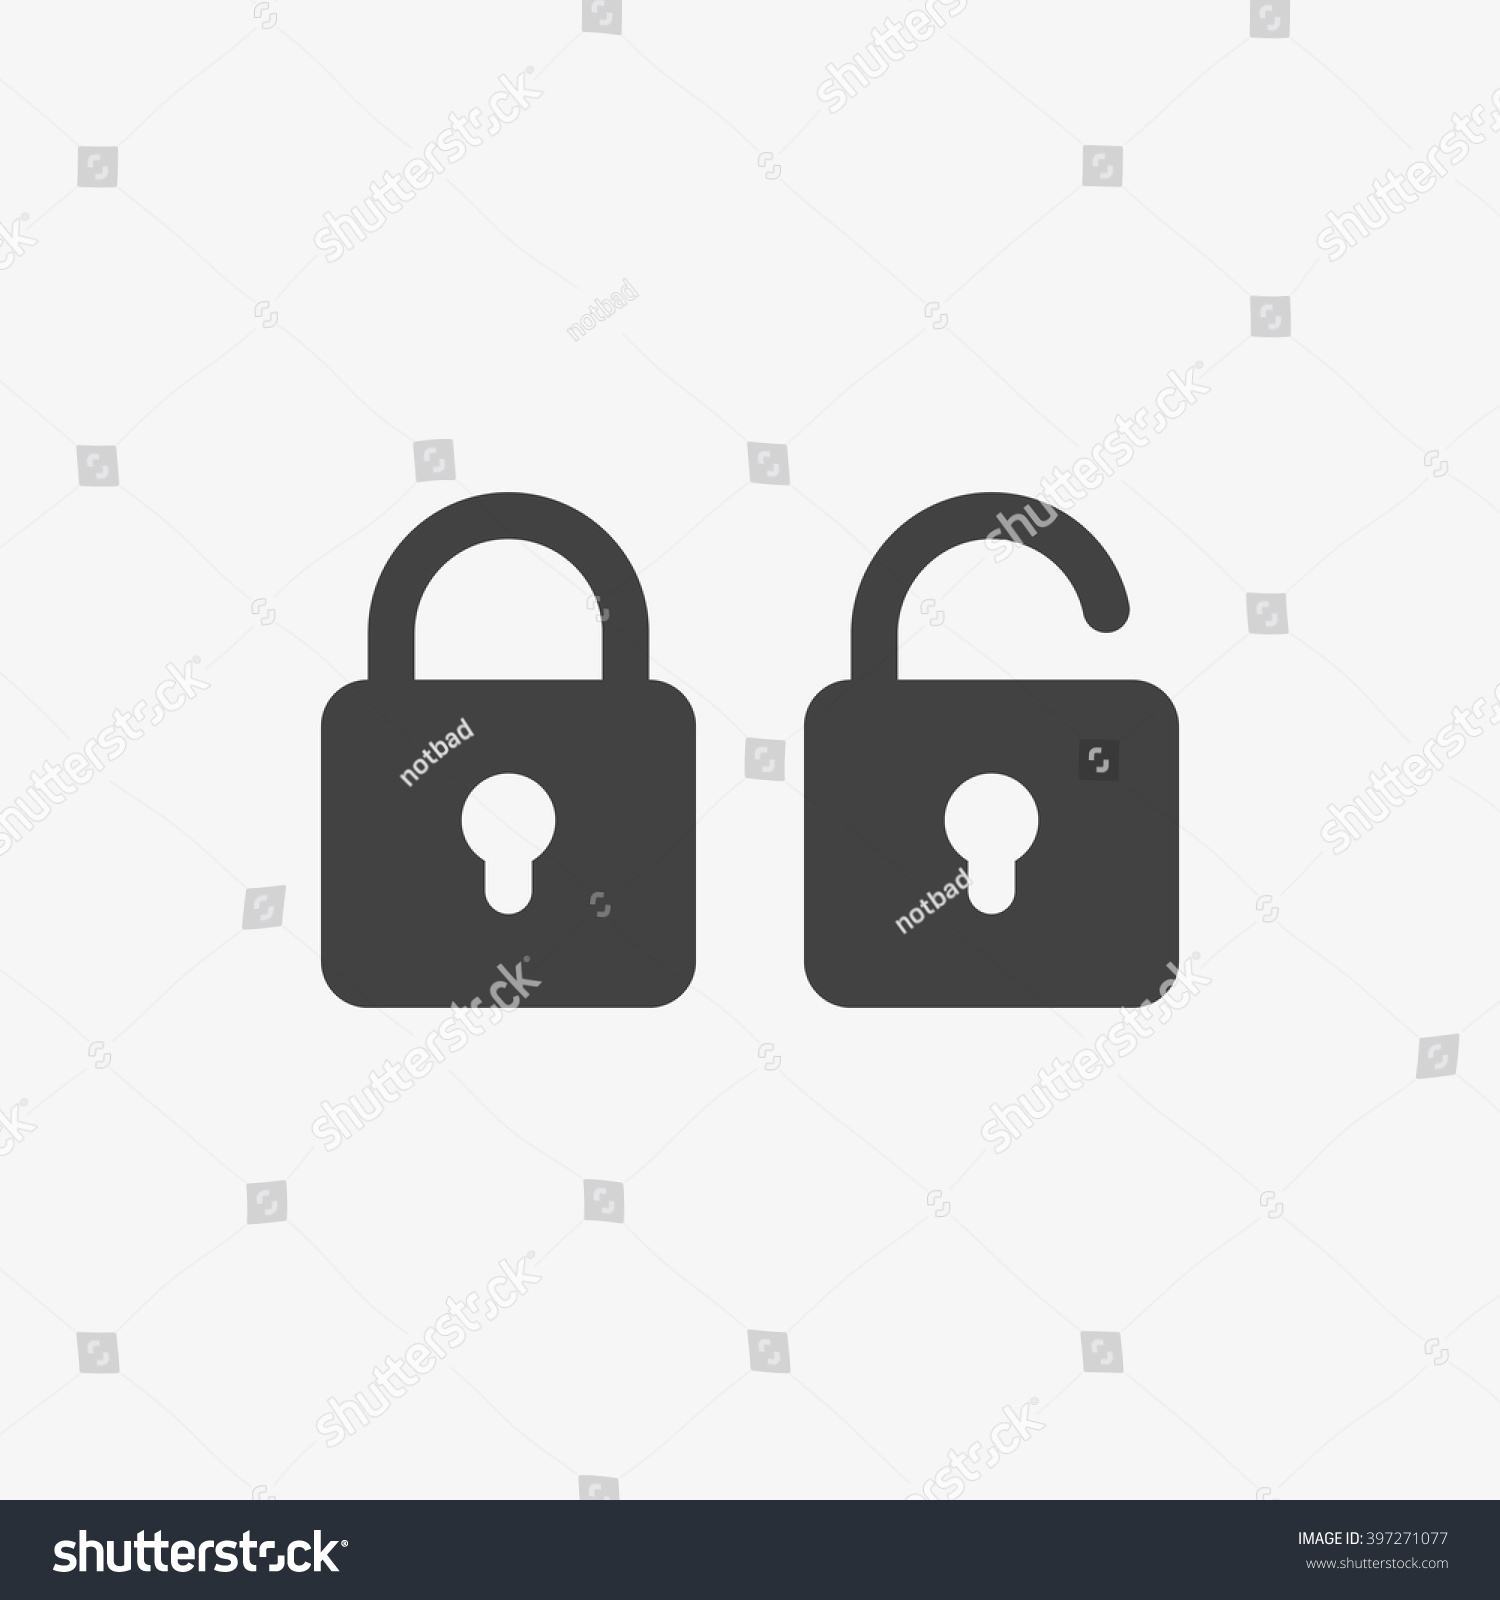 Lock Icon in trendy flat style isolated on grey background. Security symbol for your web site design, logo, app, UI. Vector illustration, EPS10. #397271077